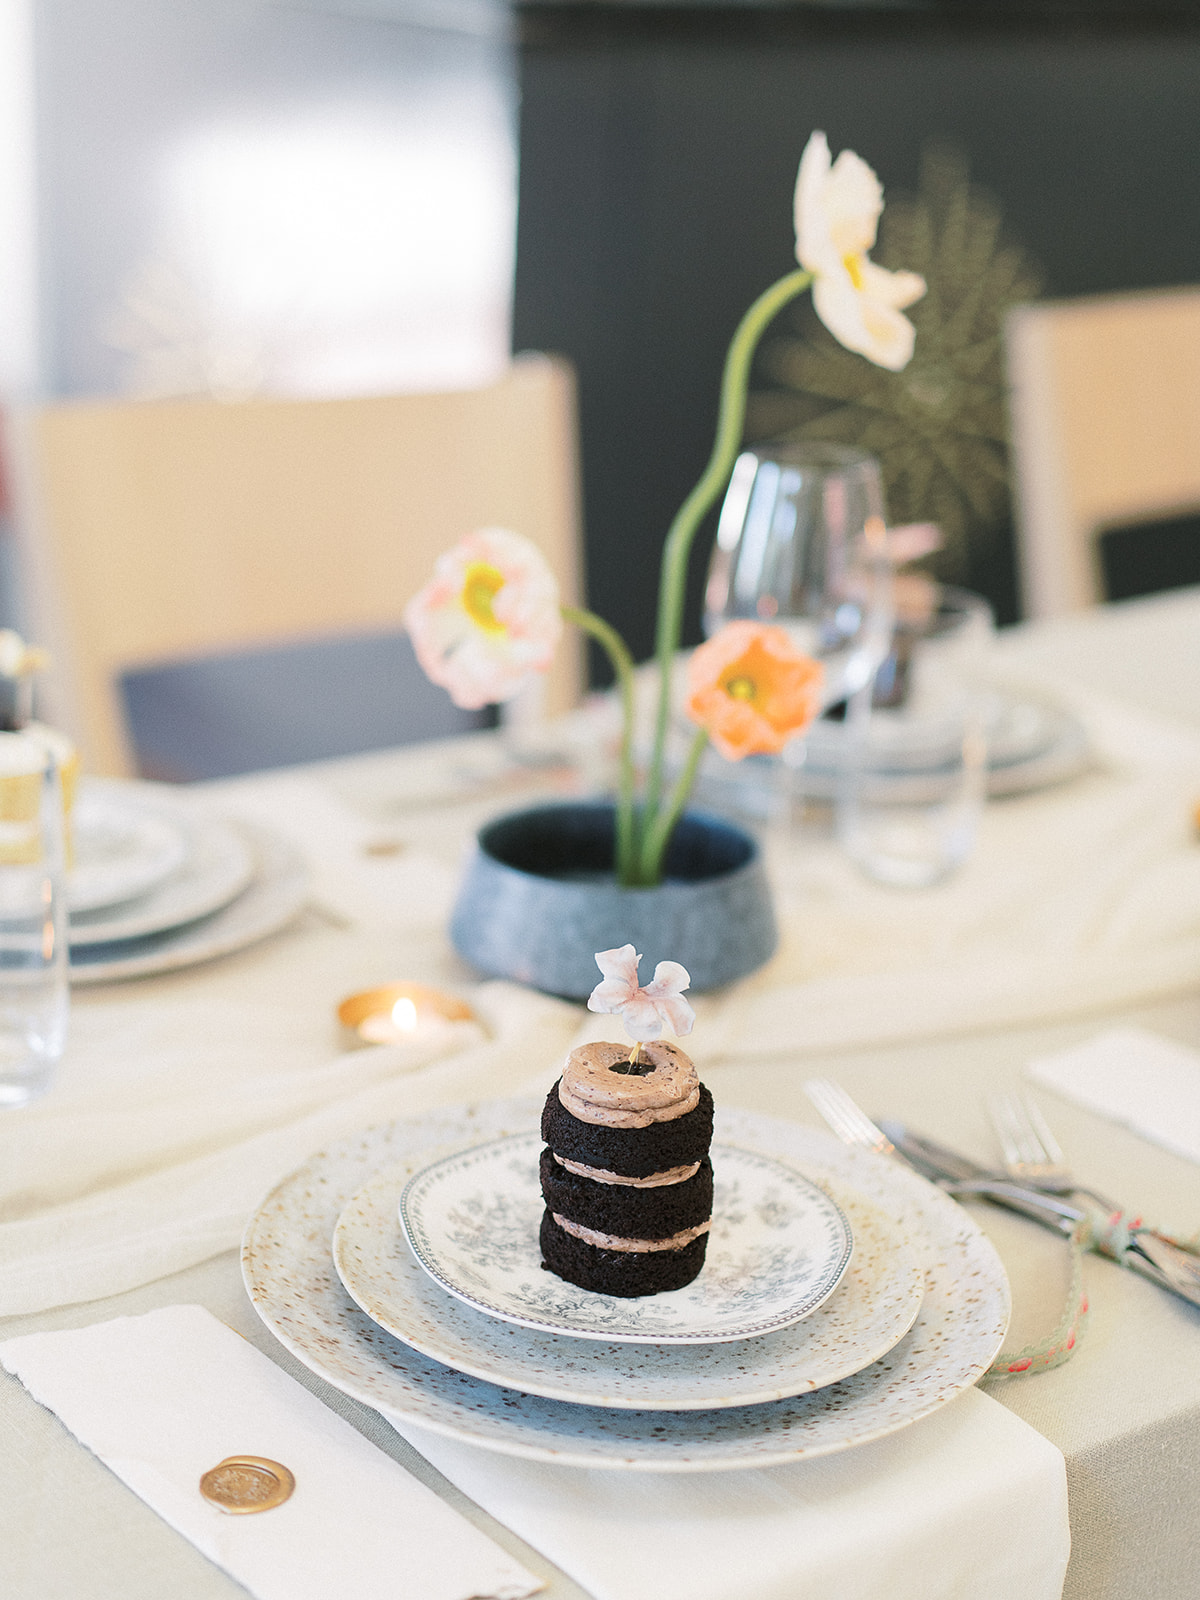 Miniature naked cake topped with a sugar flower at an intimate Charleston wedding dinner at Parcel 32, with Icelandic poppy ikebana centerpieces, speckled dinnerware, handwritten manus, vintage jacquard ribbon and soft candlelight; styling by Willow and Oak Events with photography by Kylee Yee